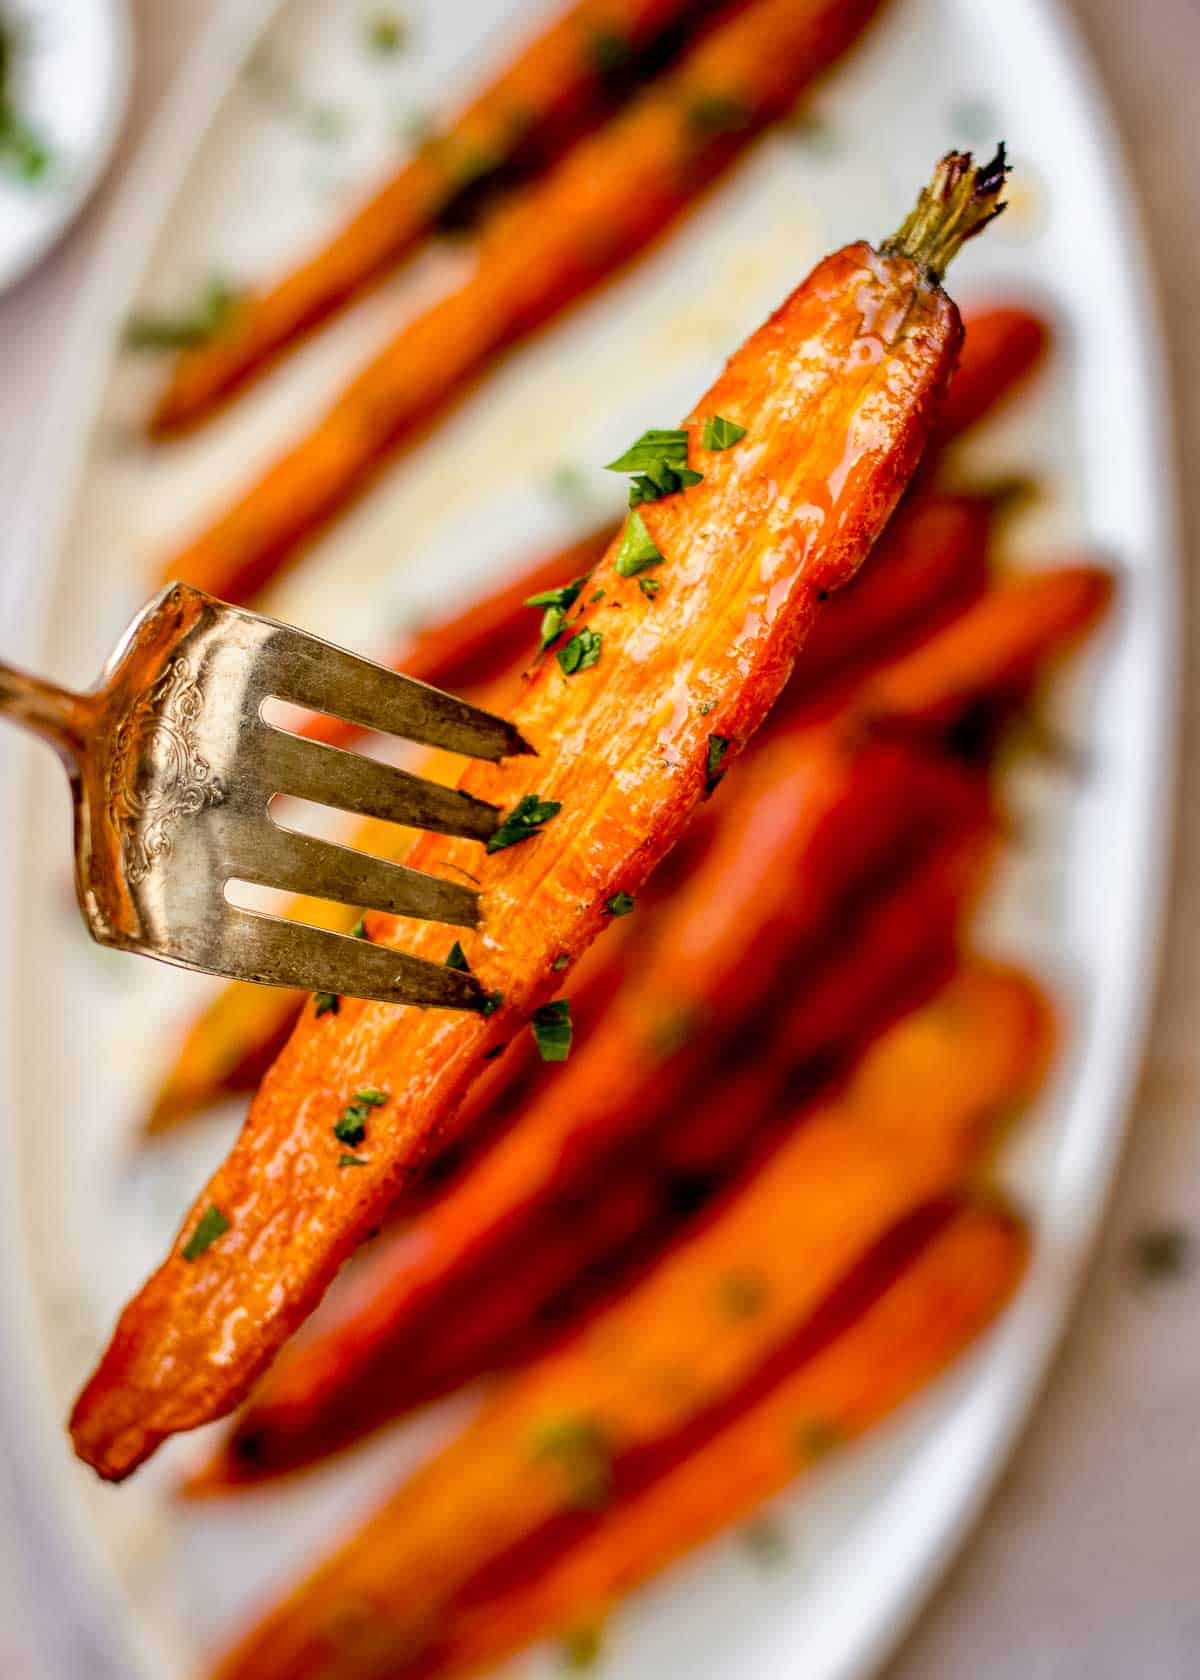 A fork with a roasted carrot on it is being held up to the camera. Behind it is a white plate of roasted carrots decorated with chopped parsley.